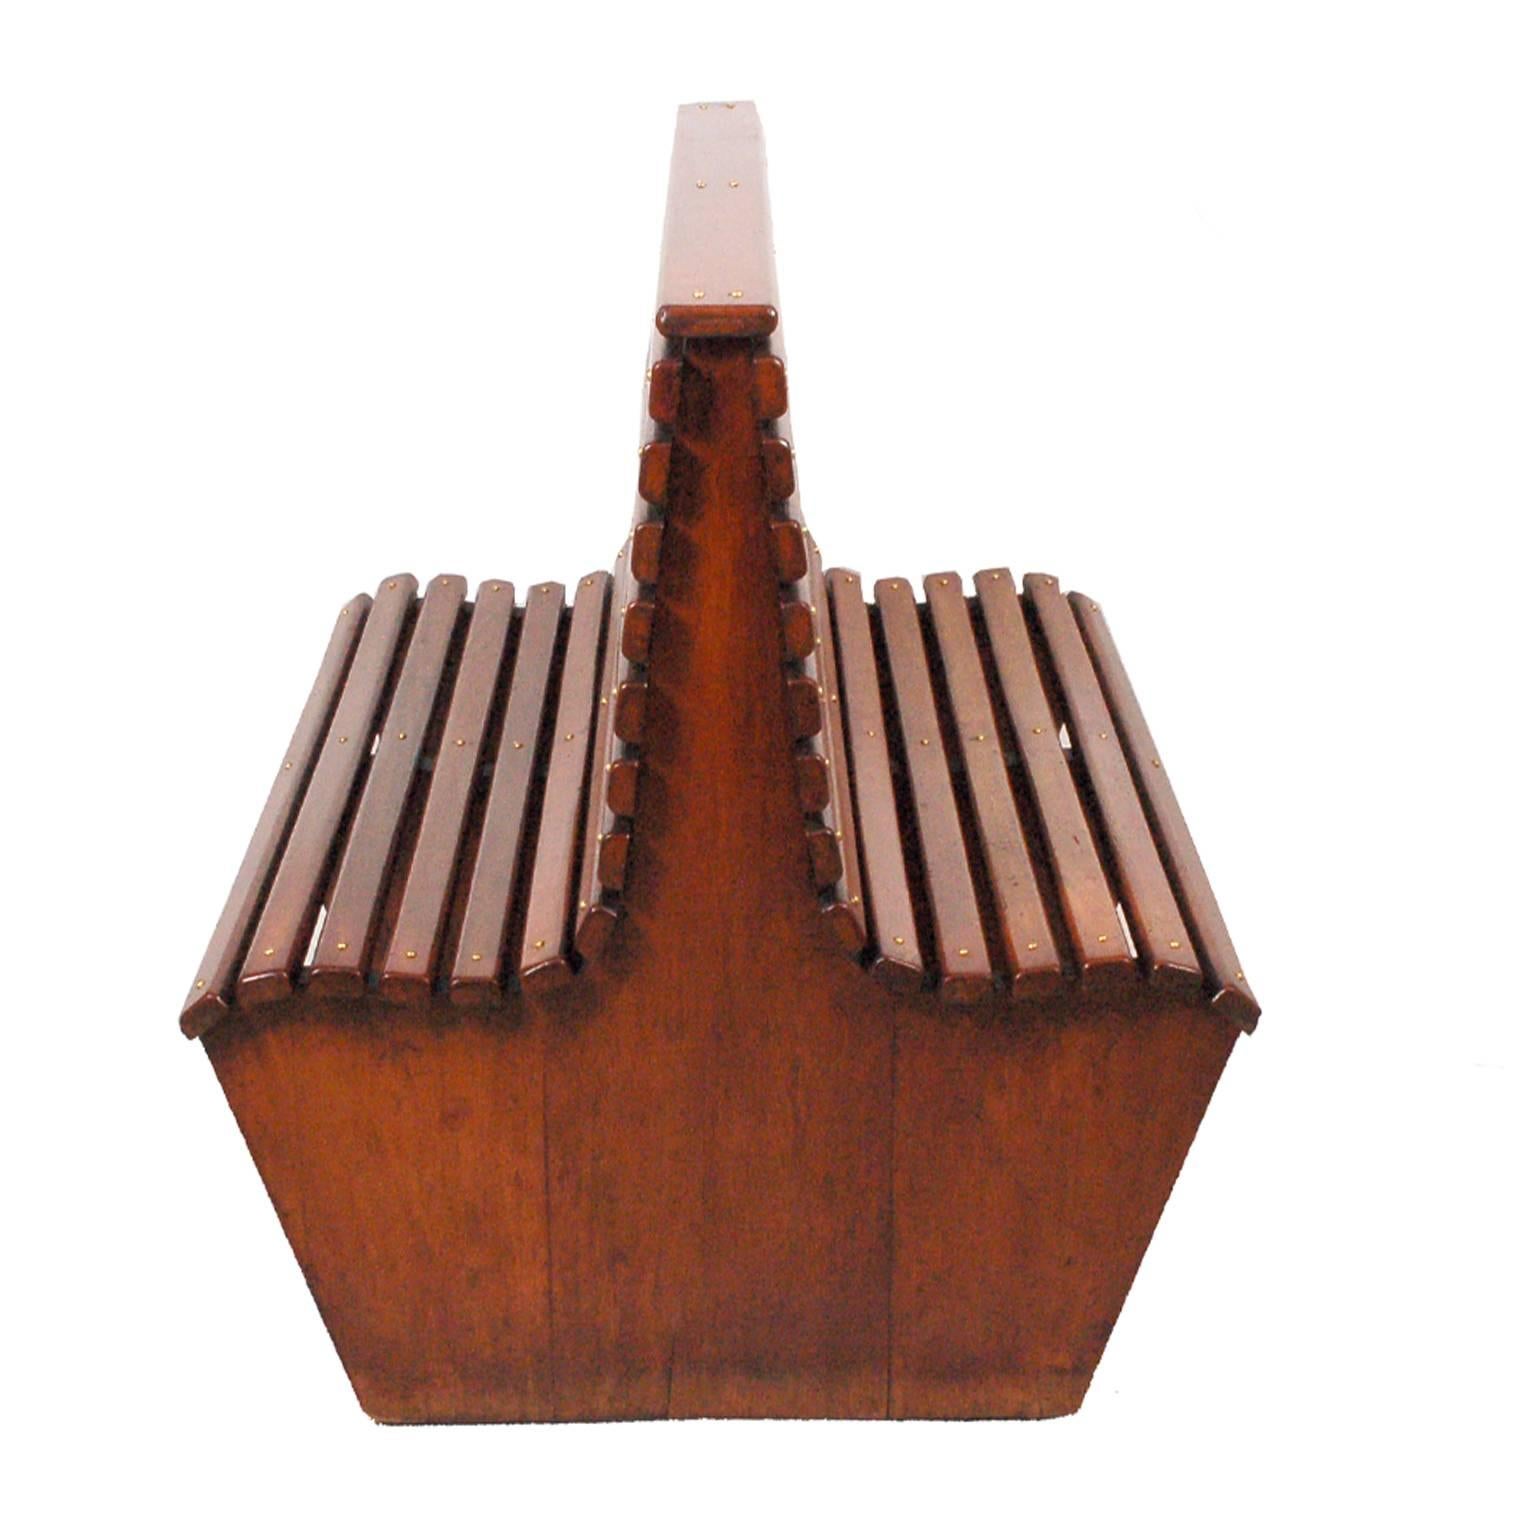 Unusual two-sided solid mahogany slat bench with brass screw connection. Can be used in a garden or covered patio area.